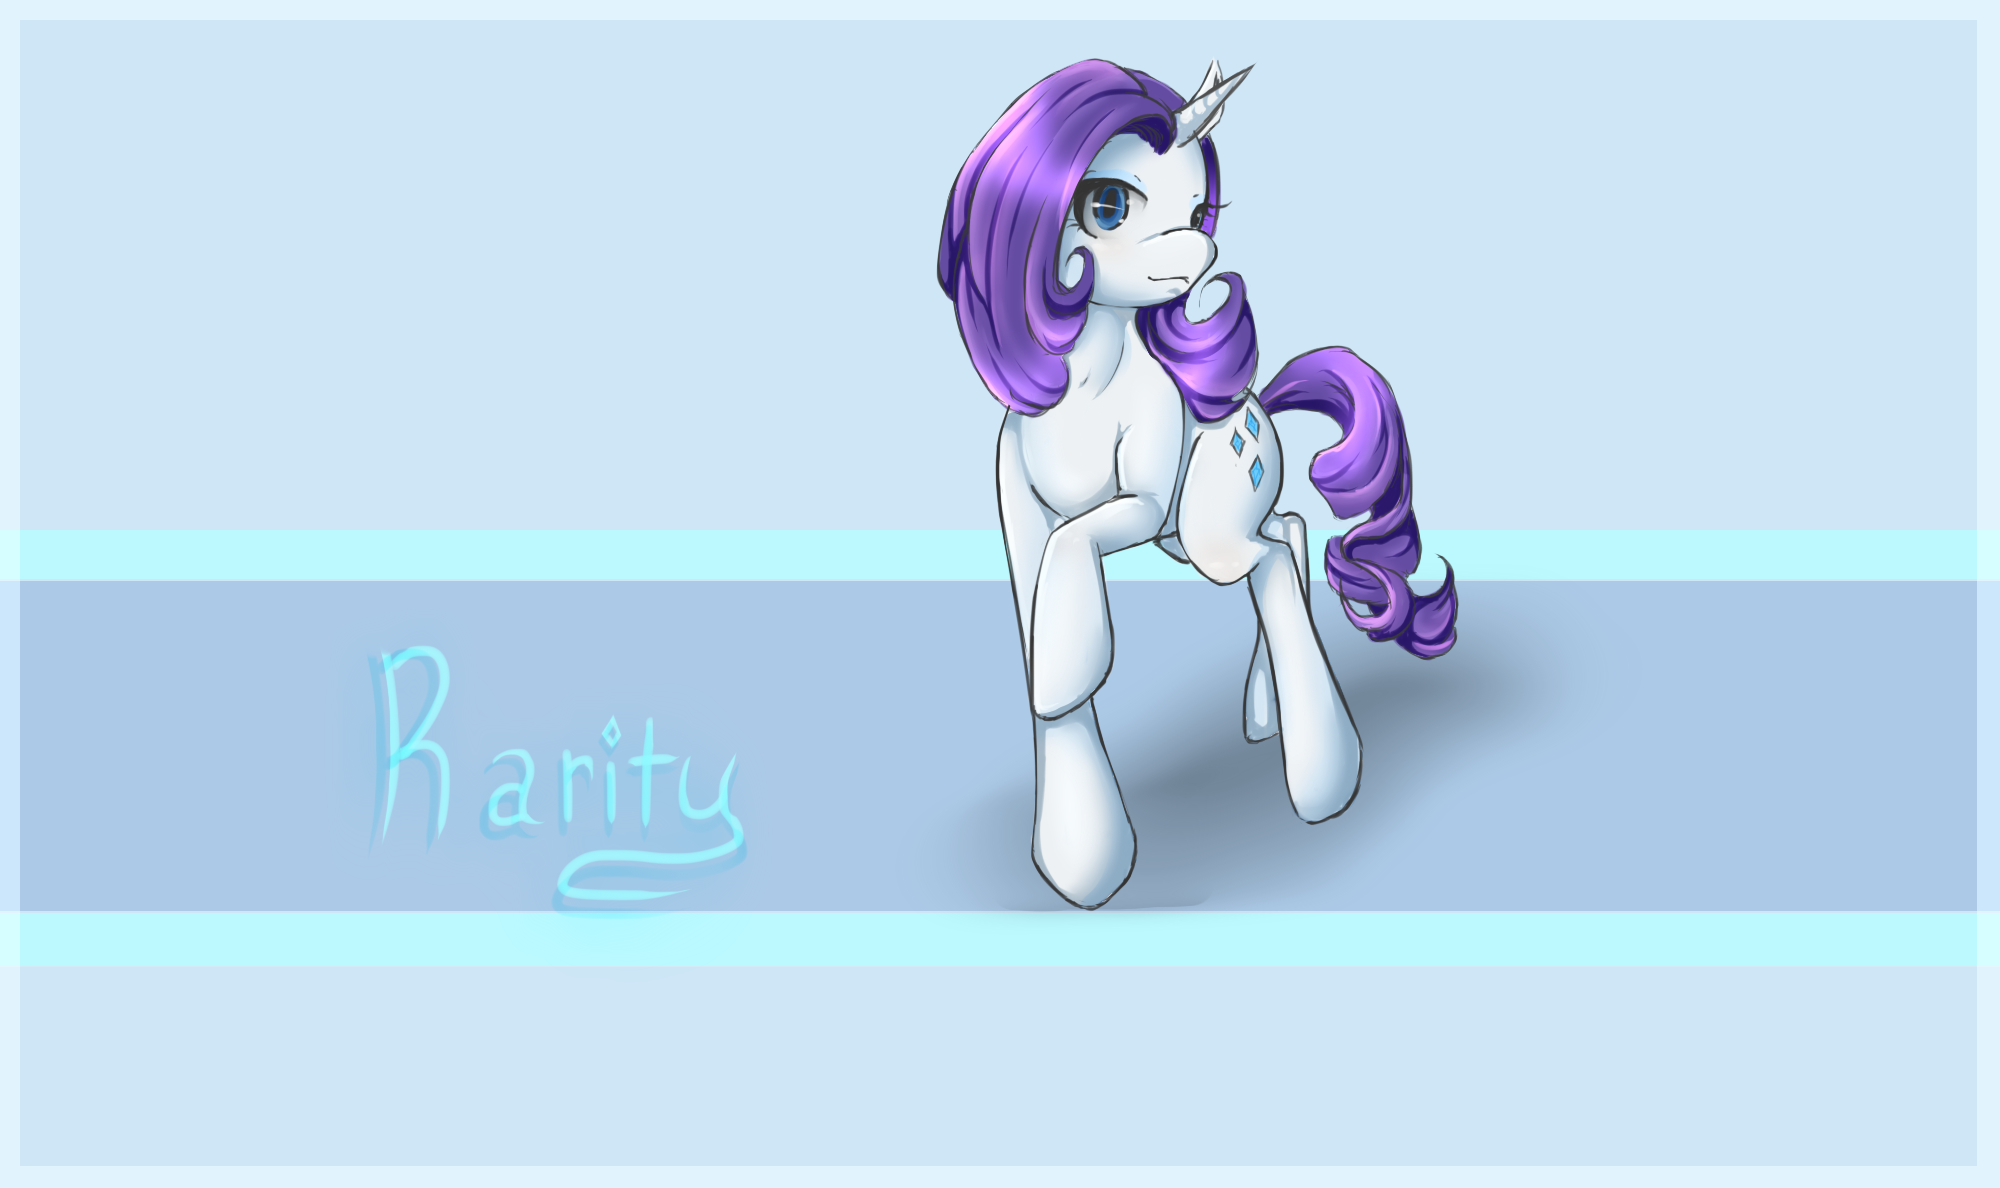 Rarity by Crisis16